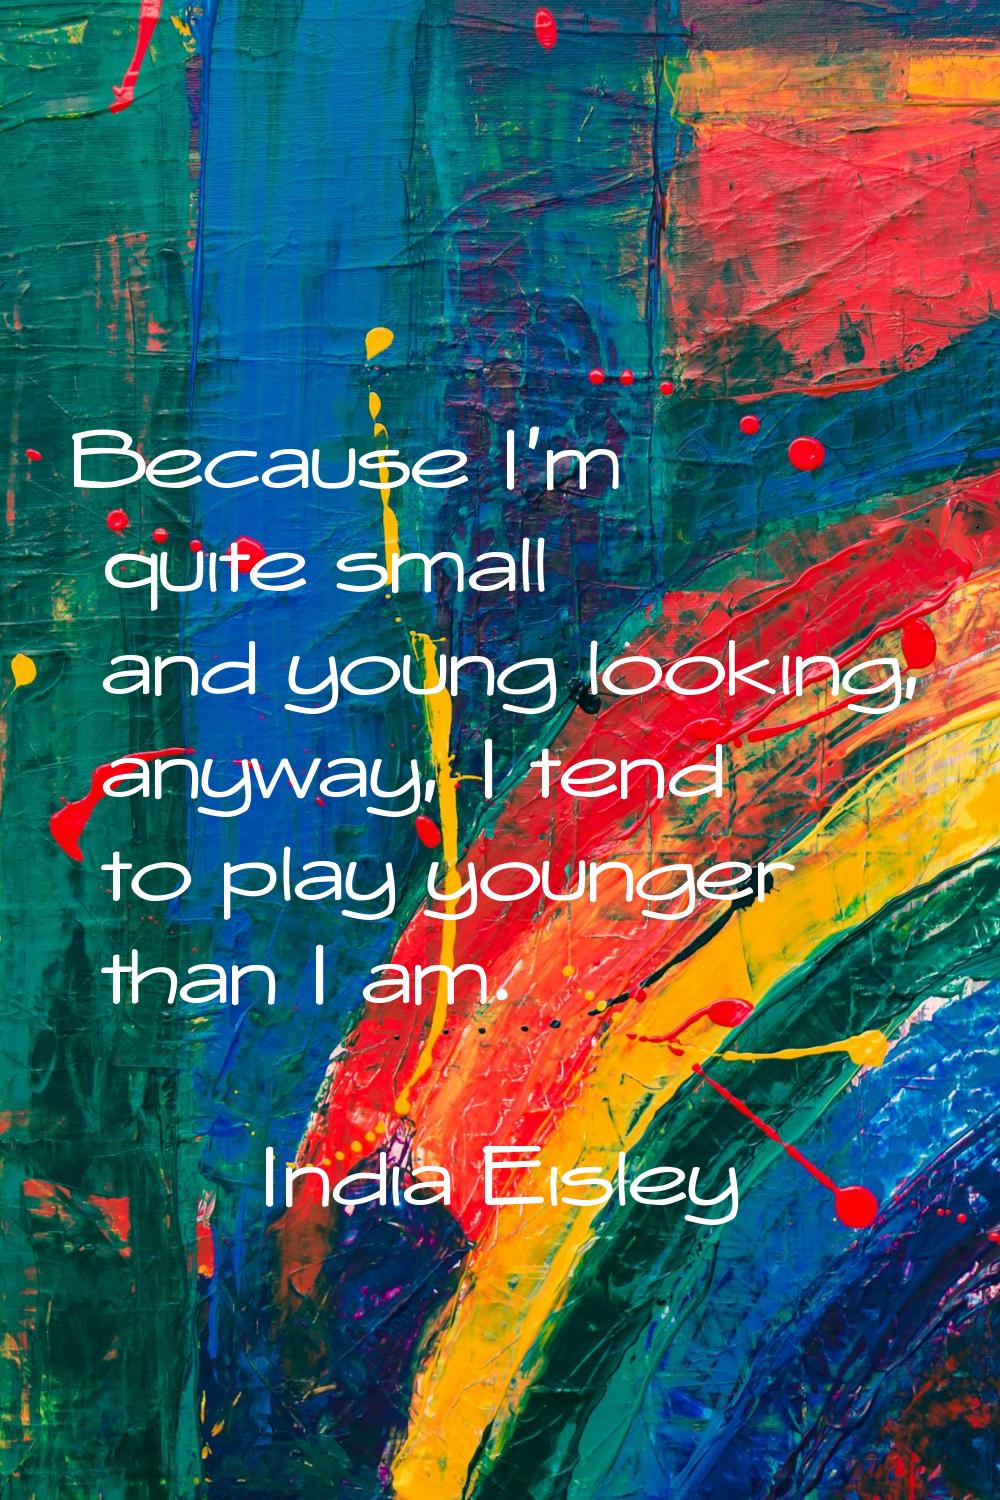 Because I'm quite small and young looking, anyway, I tend to play younger than I am.